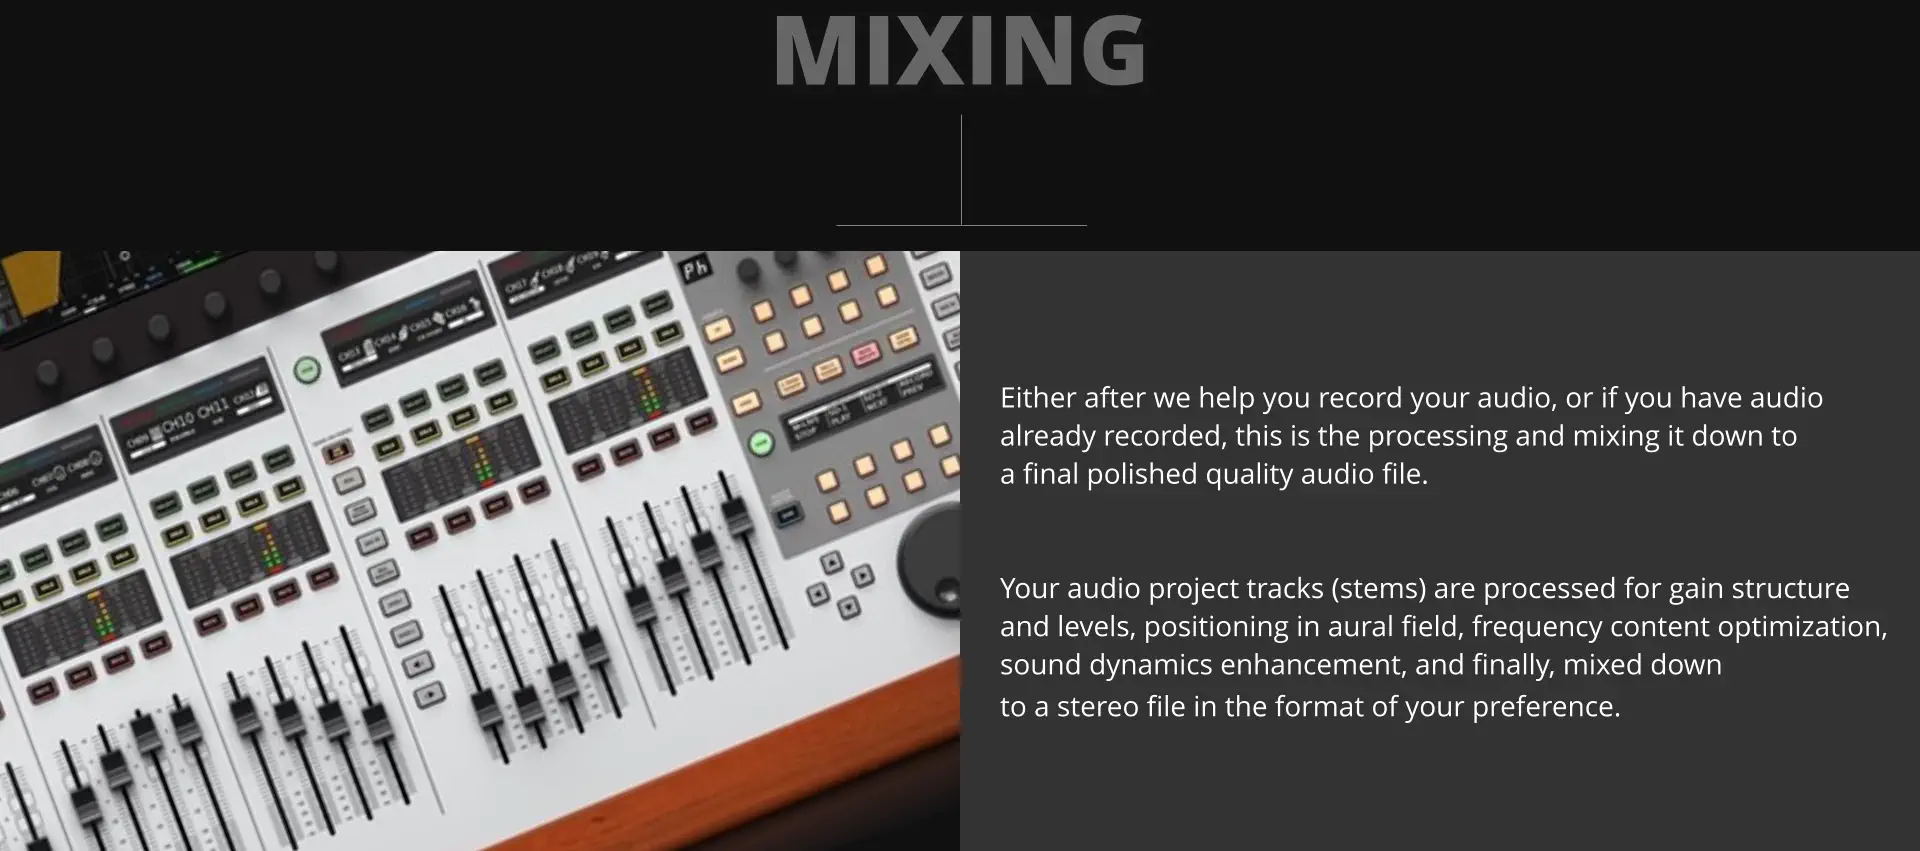 MIXING Either after we help you record your audio, or if you have audio already recorded, this is the processing and mixing it down to  a final polished quality audio file.   Your audio project tracks (stems) are processed for gain structure and levels, positioning in aural field, frequency content optimization, sound dynamics enhancement, and finally, mixed down to a stereo file in the format of your preference.